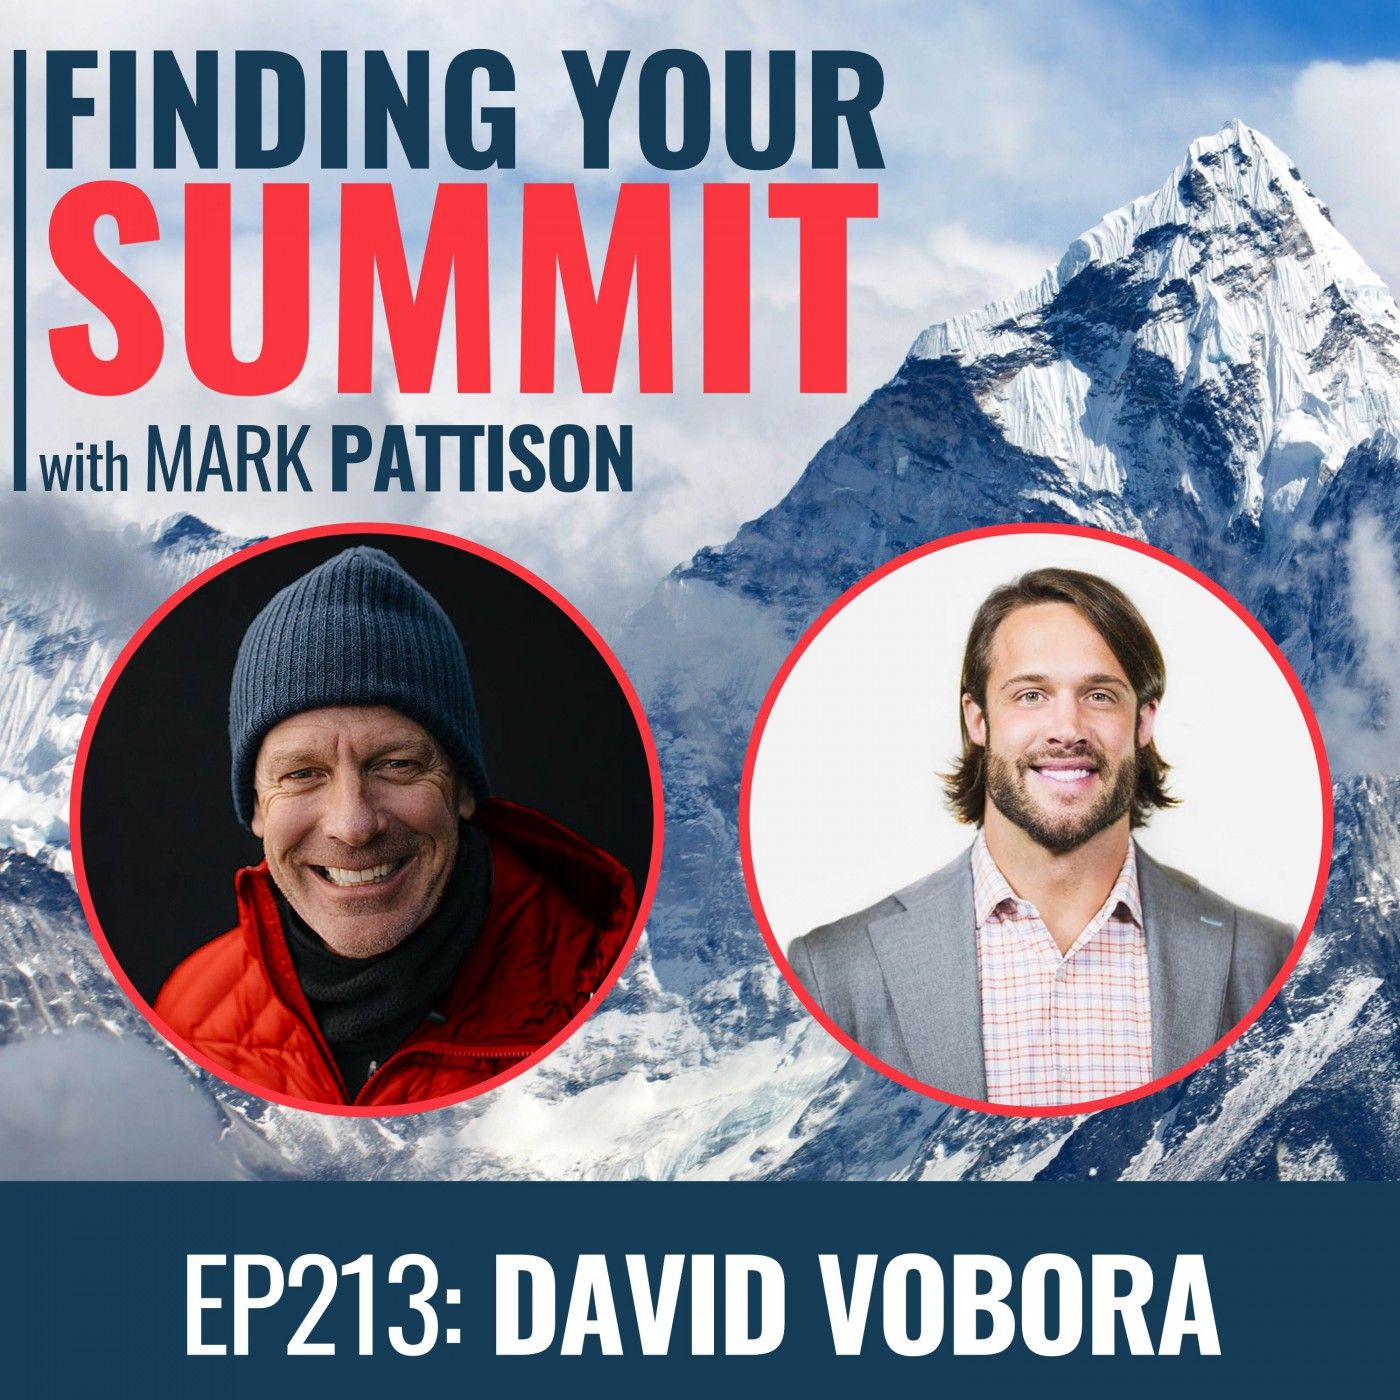 EP 213: Former NFL Player David Vobora making a difference